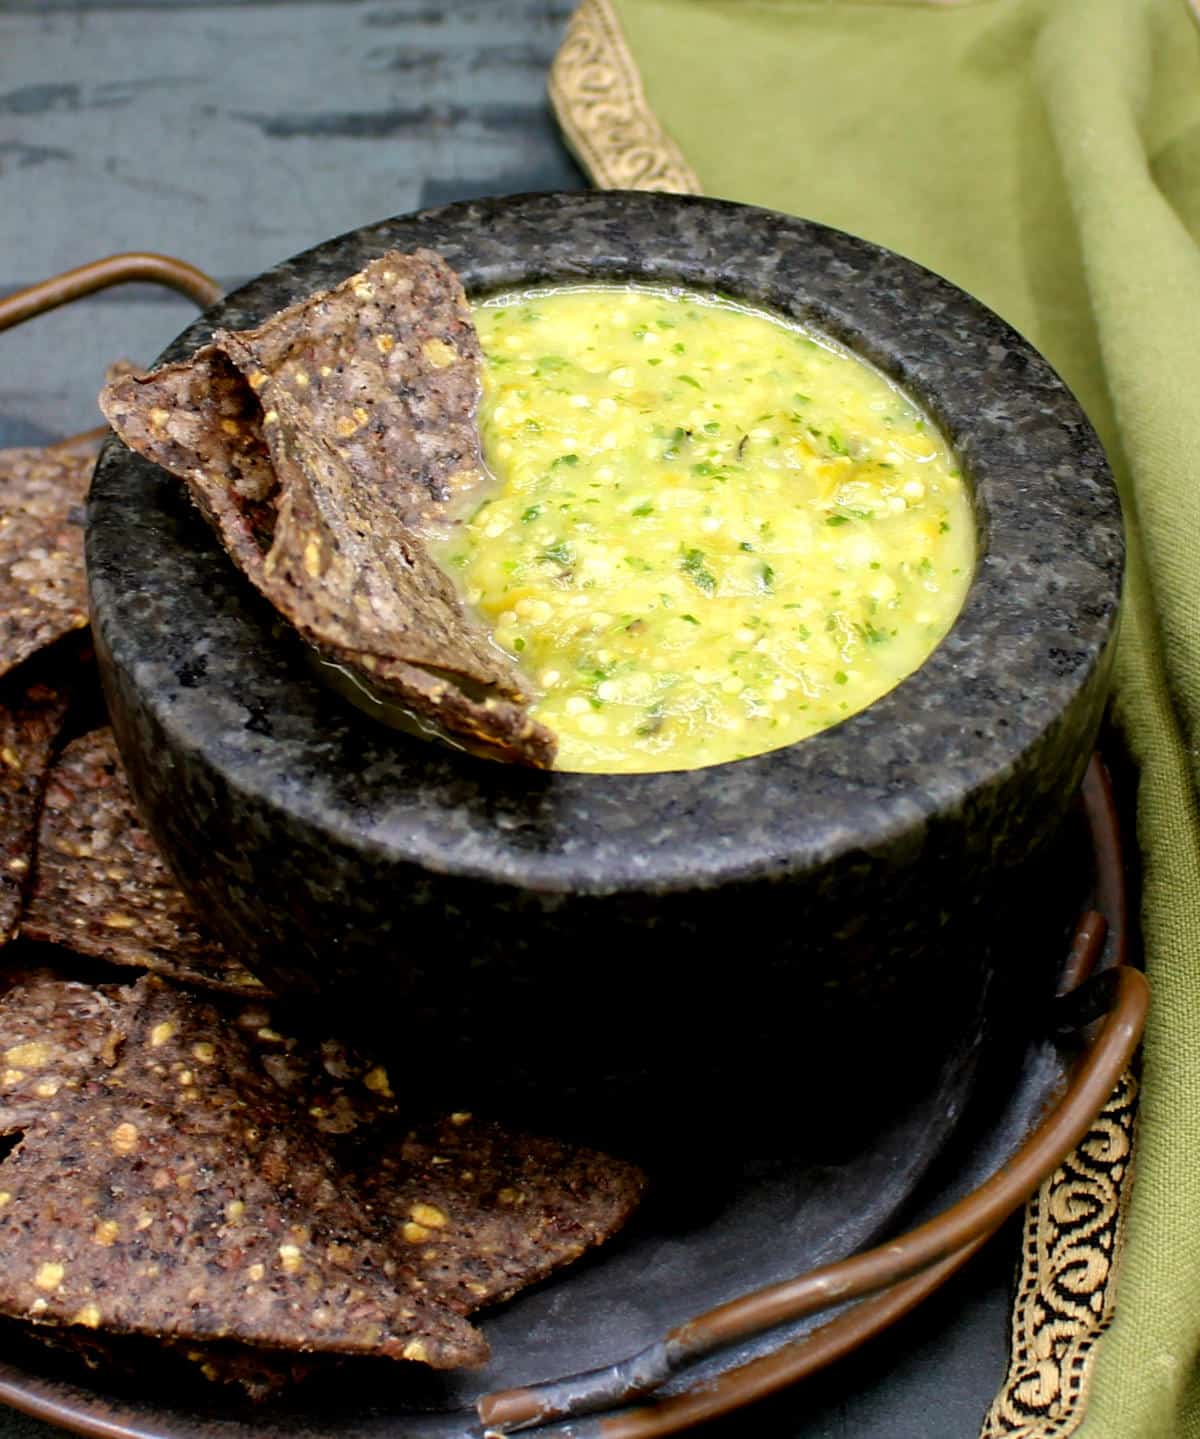 Salsa verde or Mexican green sauce in molcajete bowl with tortilla chips.